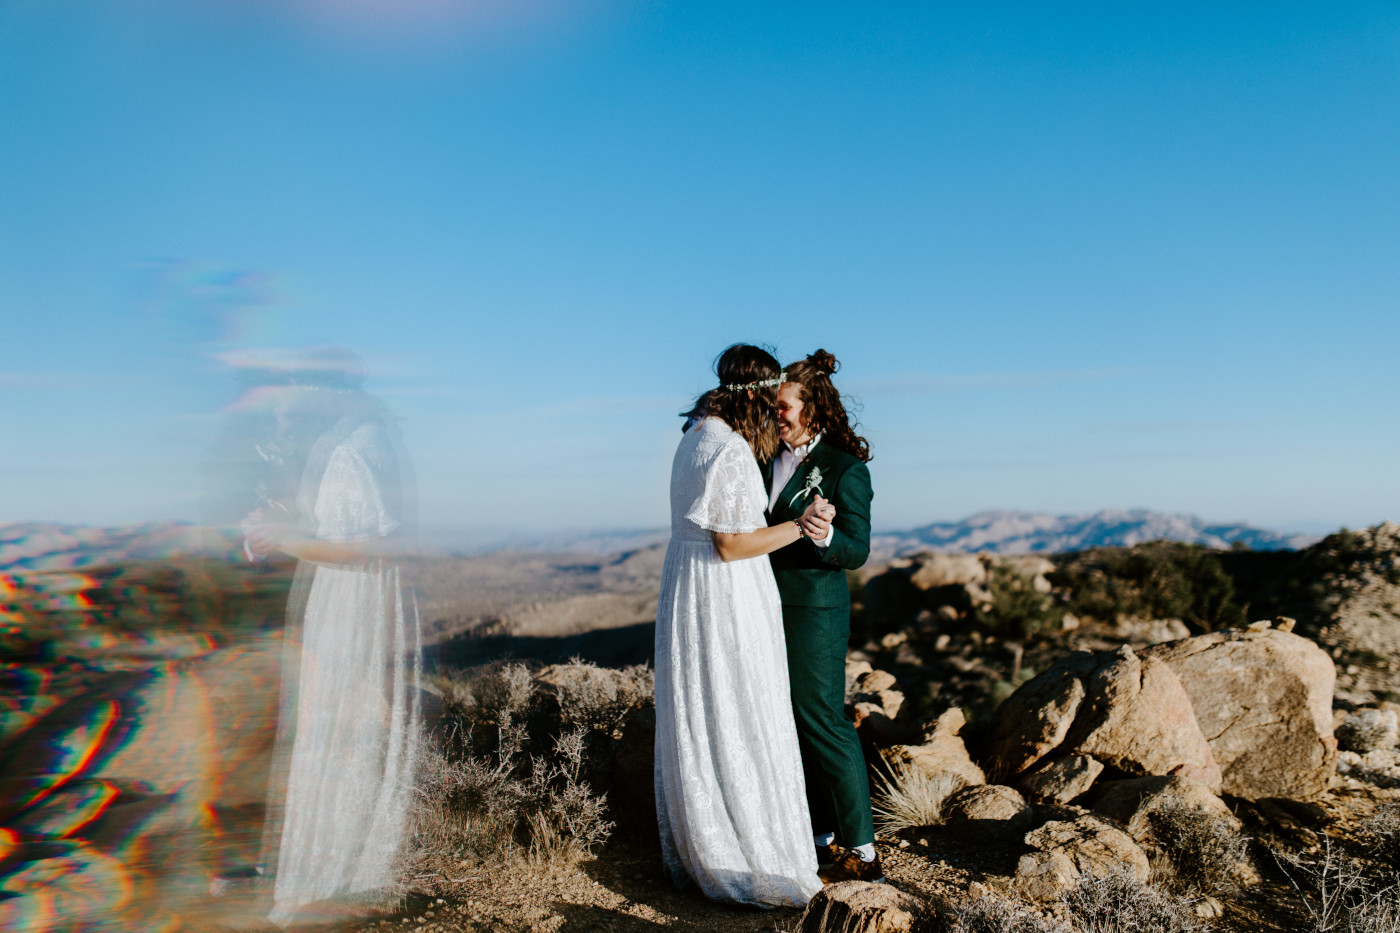 Becca and Madison share a slow dance in the desert.